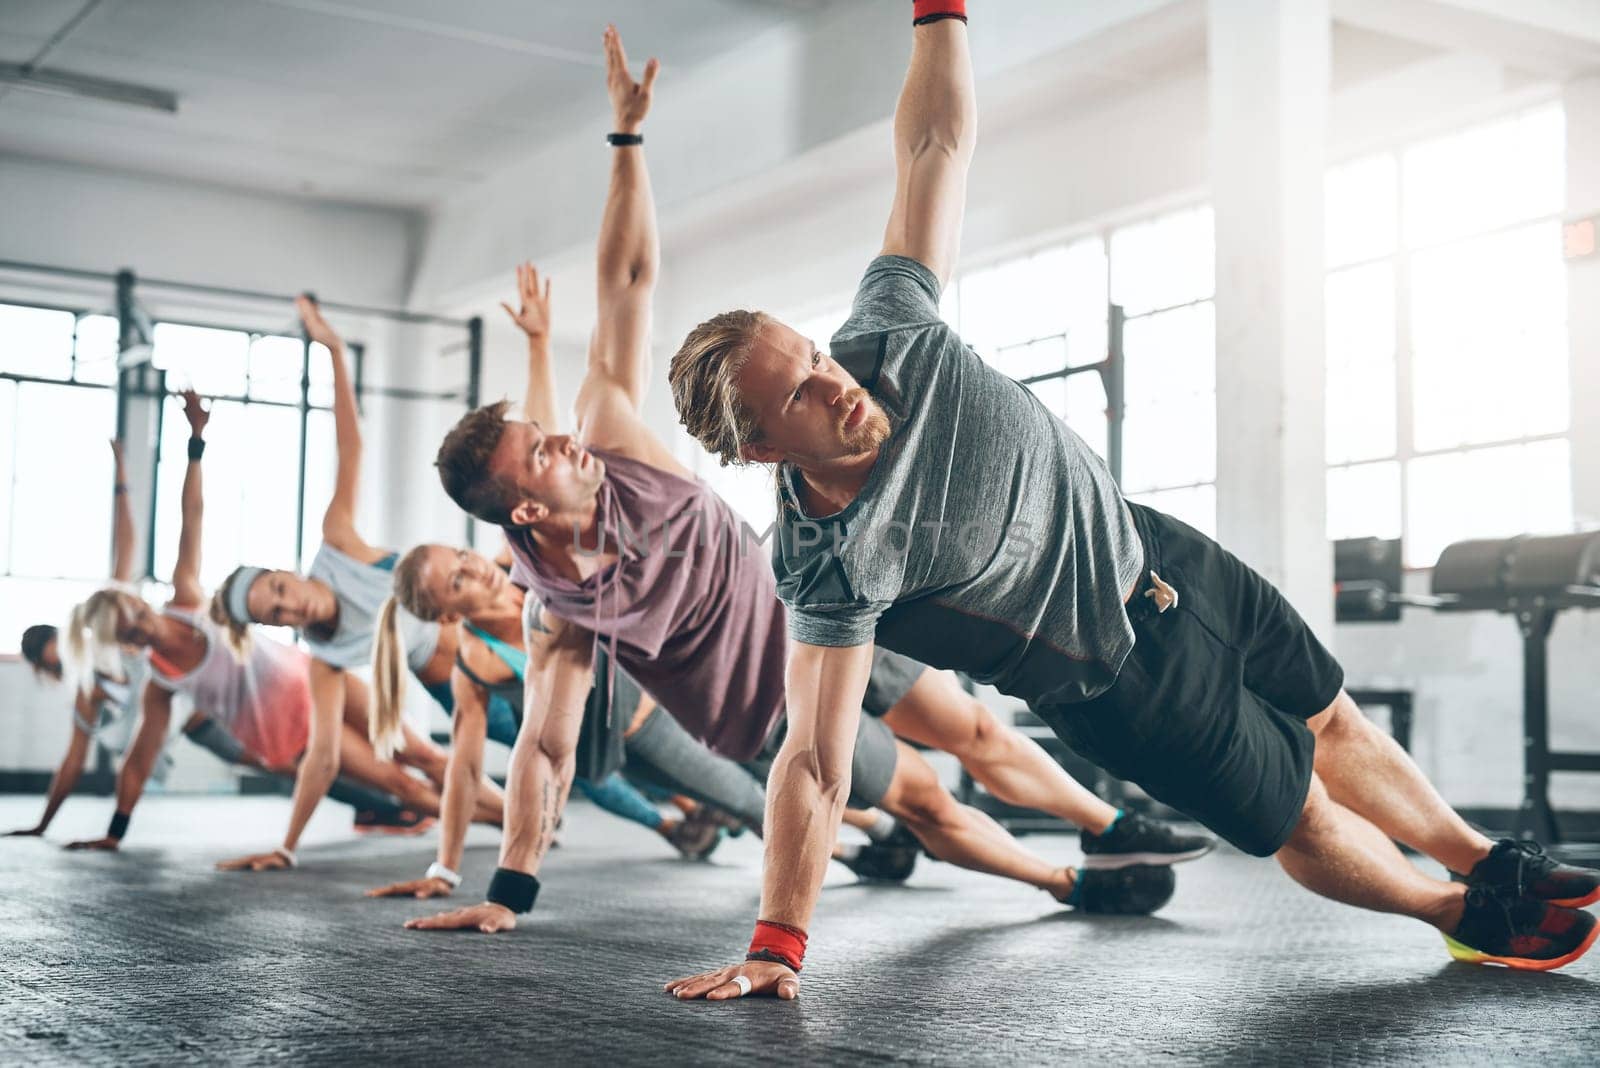 Gym class, group and athletes doing a workout for fitness, health or wellness flexibility. Sports, community and people doing a side plank exercise, training or challenge together in a sport studio